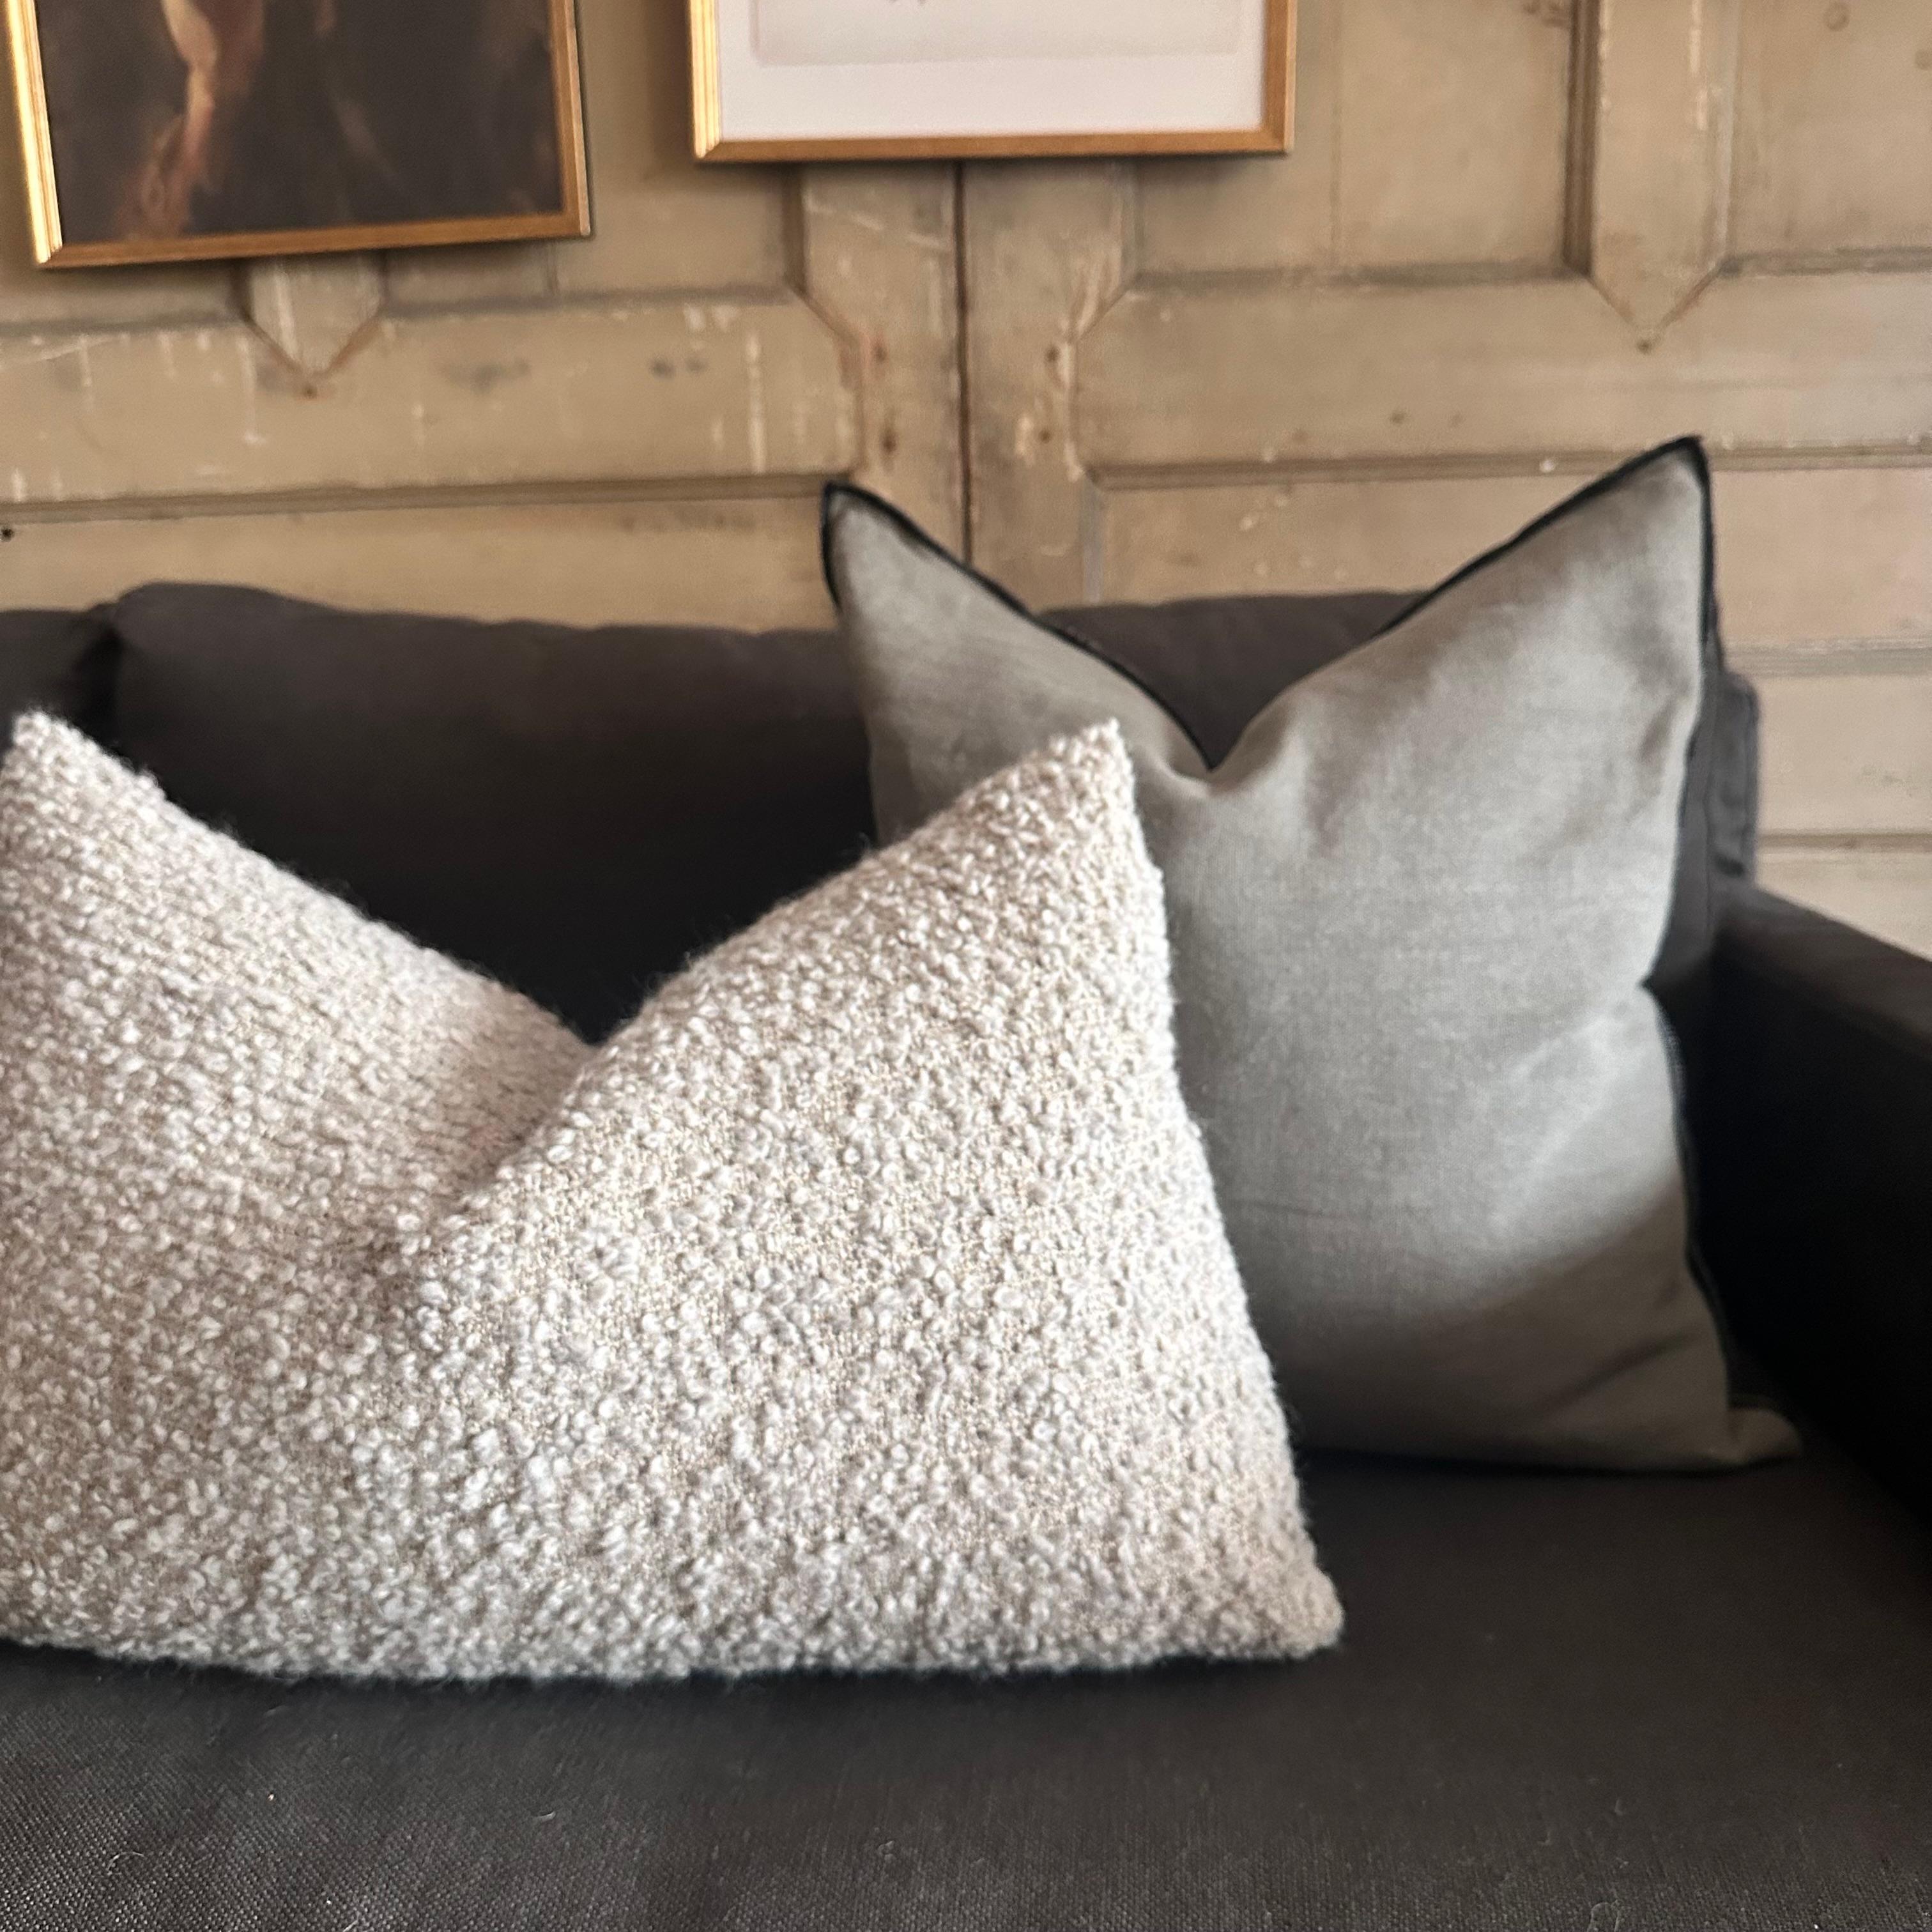 The Bubley pillow is made with a Belgian linen warp and alternating Belgian linen/Alpaca wool weft. The boucle Alpaca weft creates a stunning texture that contrast beautifully with the Belgian linen.   
Color: A soft pale shale gray wool with flax